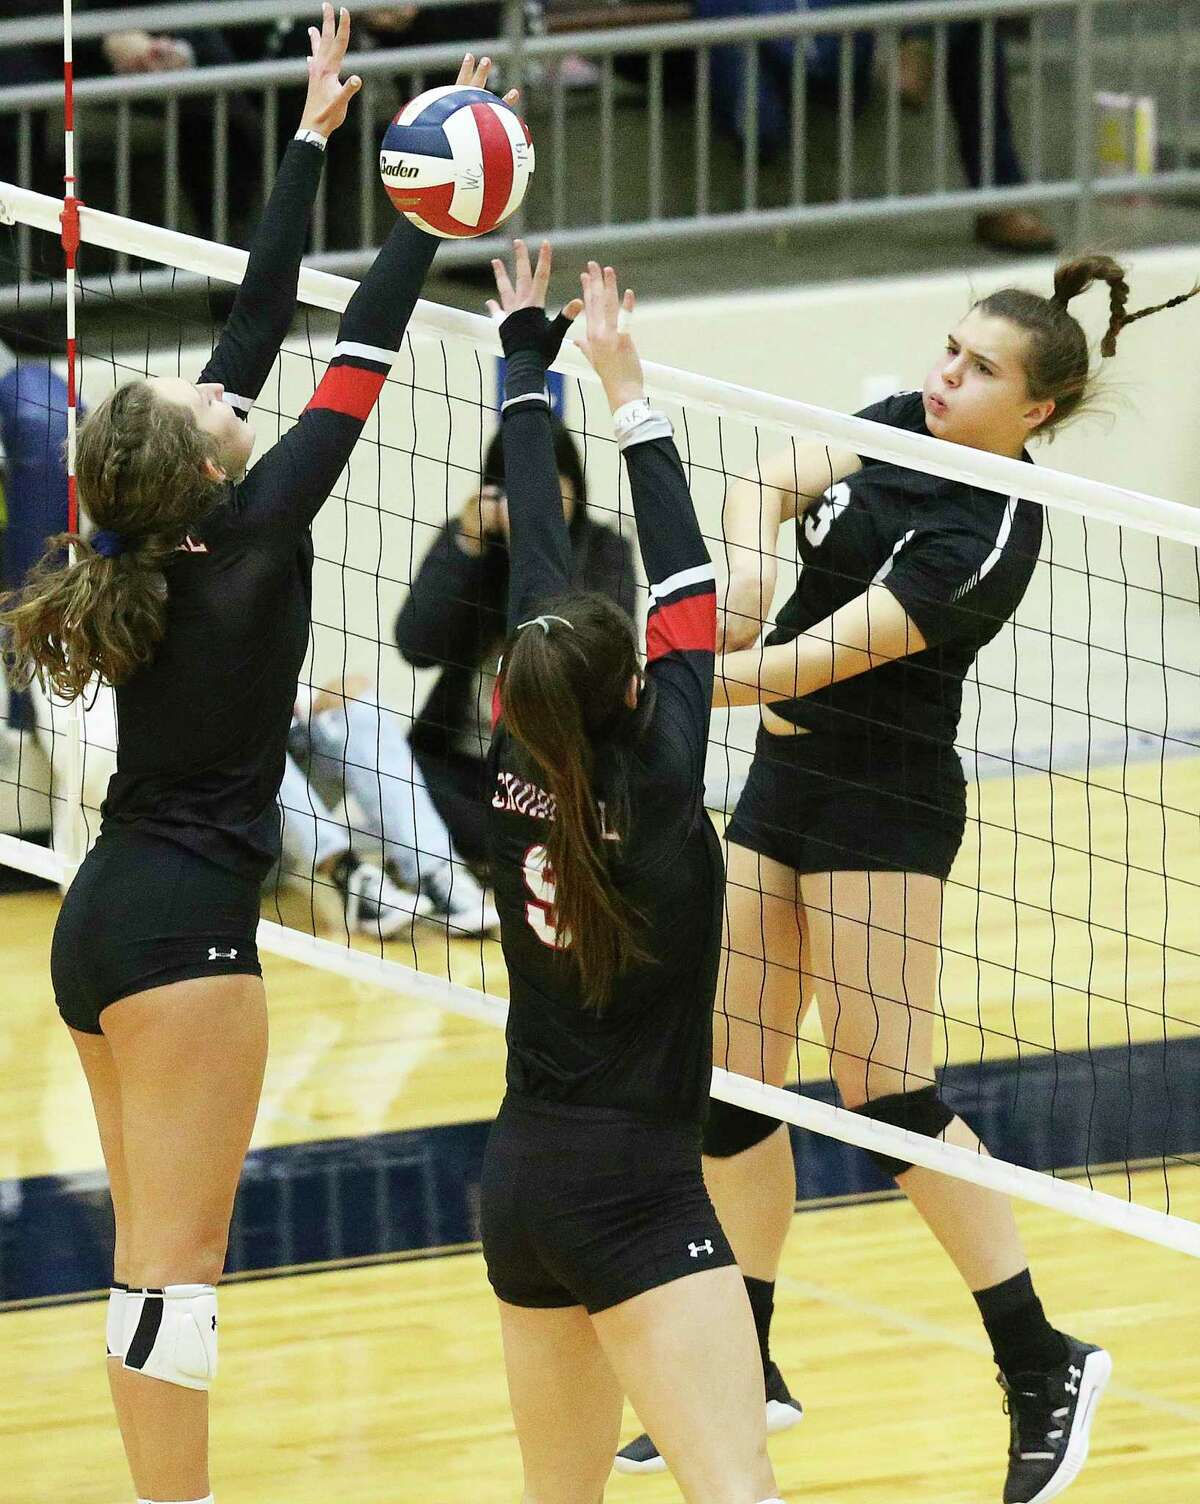 Clark hitter Mackenzie Wolff gets the ball over defenders as Clark plays Churchill in 6A third round volleyball playoff action at the Alamo Convocation Center on Nov. 12, 2019.